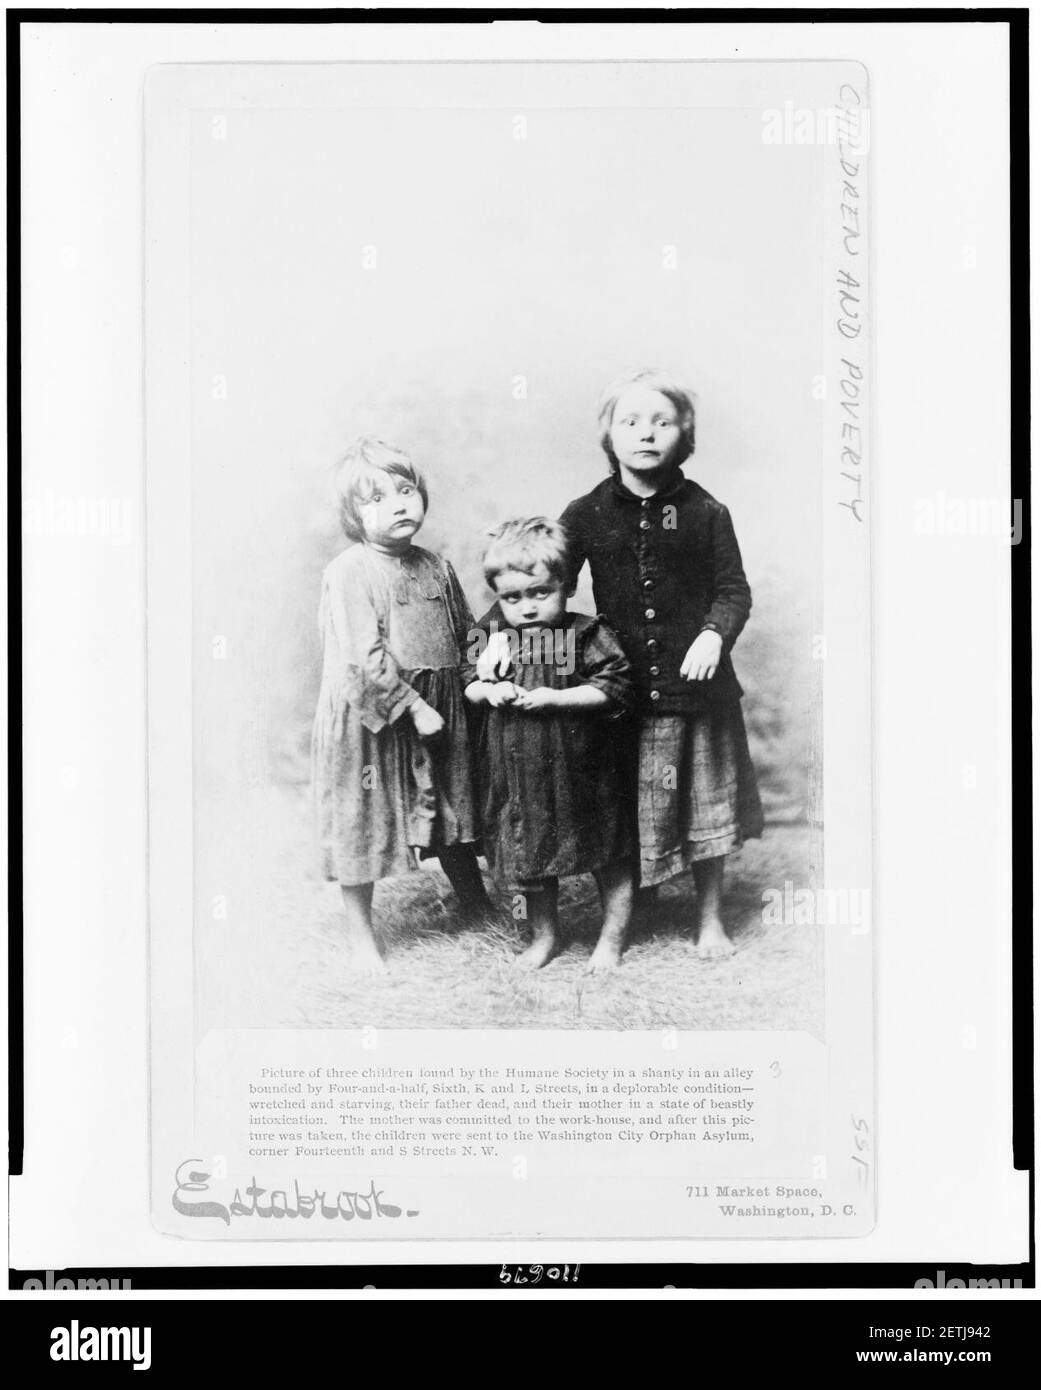 Picture of three children found by the Humane Society in a shanty in an alley bounded by Four-and-a-half, Sixth, K and L Streets, in a deplorable condition-wretched and starving, their Stock Photo